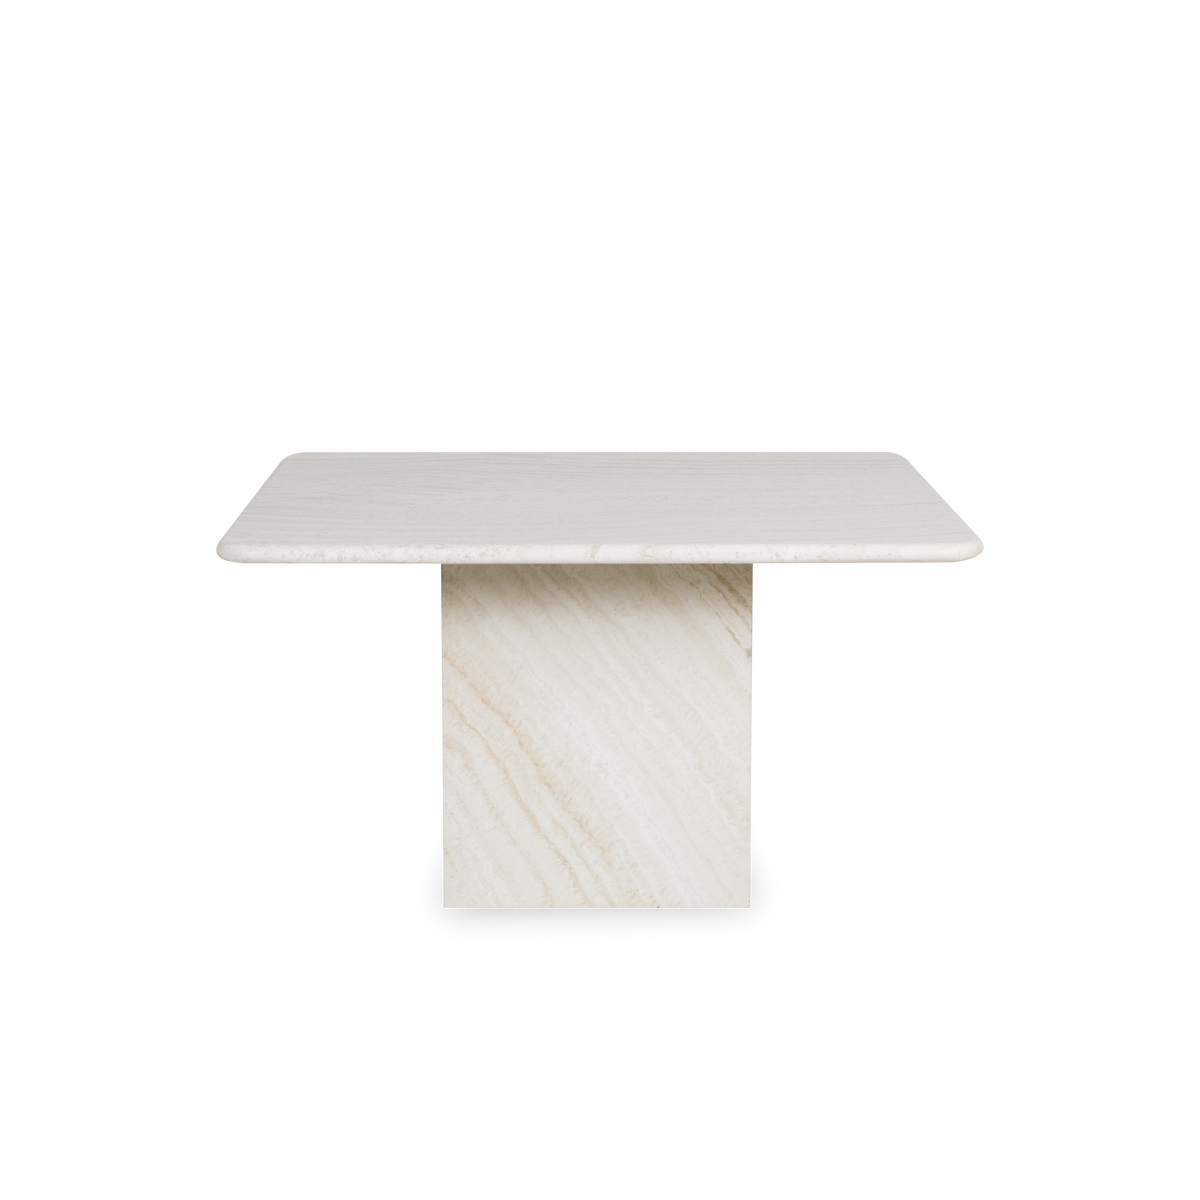 Expertly crafted from sumptuous off-white sandstone, the Decker Coffee Table embodies simplicity, letting the richness of the material take center stage.